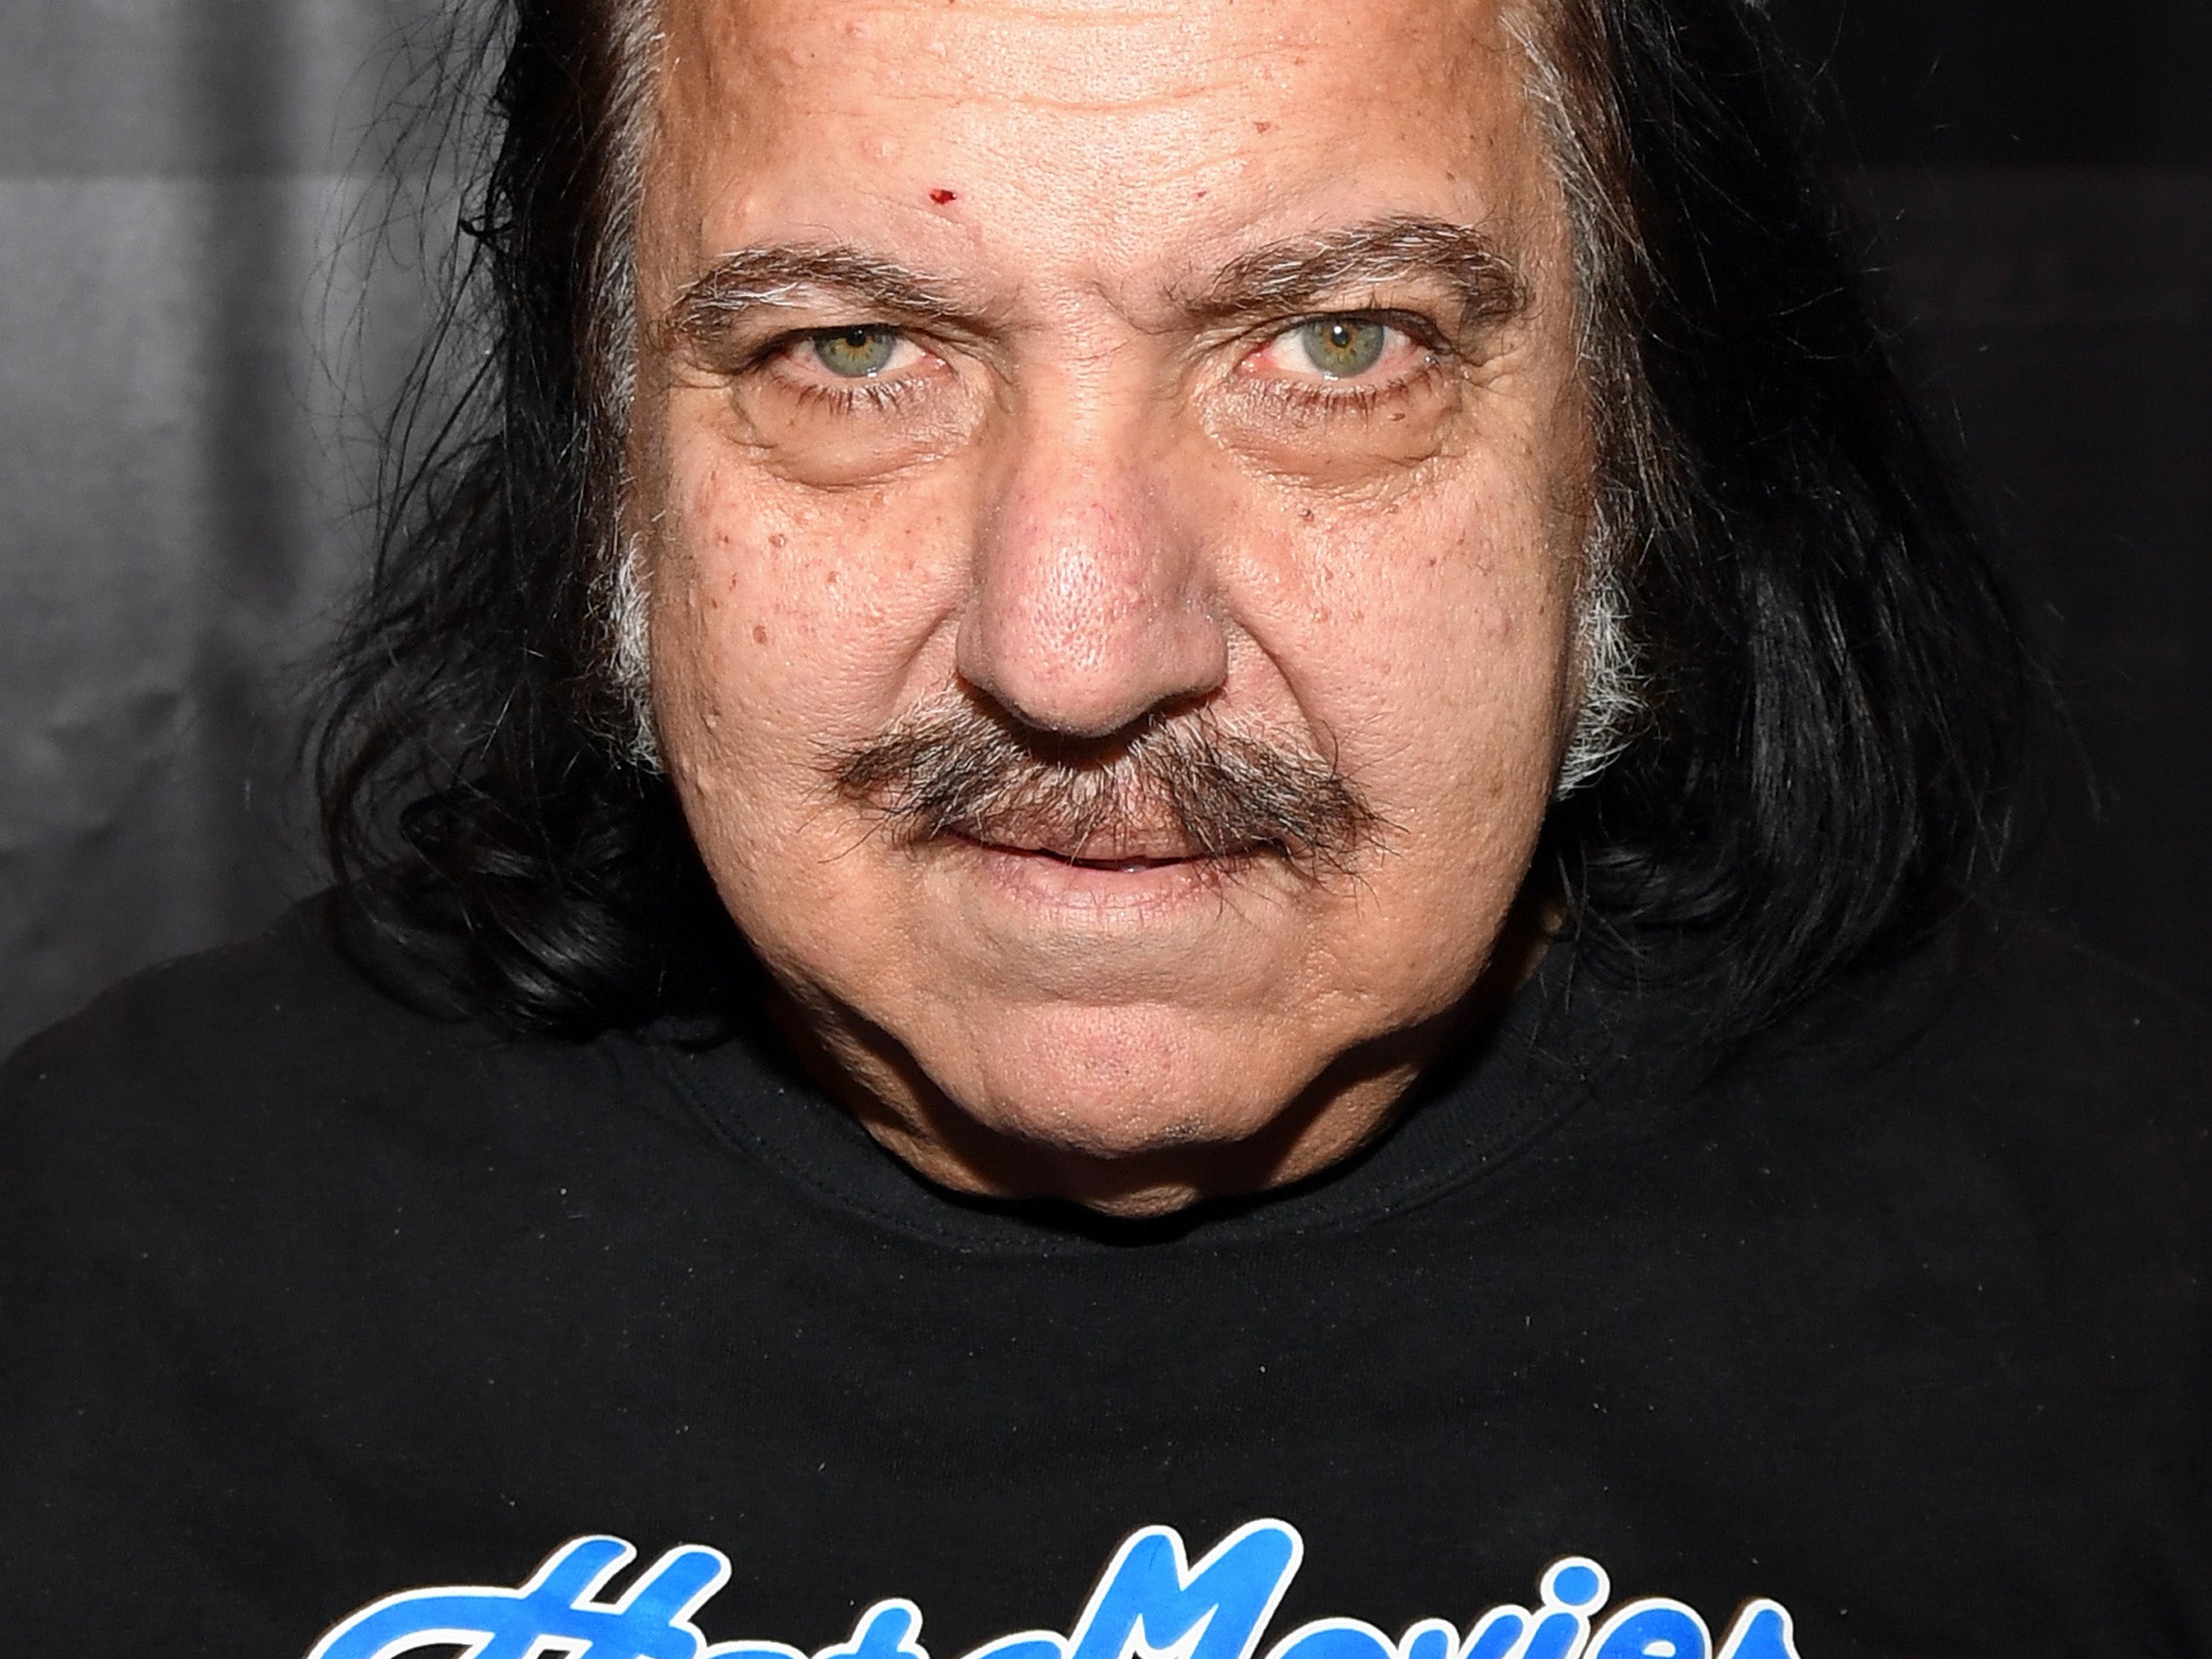 danielle upshaw share ron jeremy in porn photos